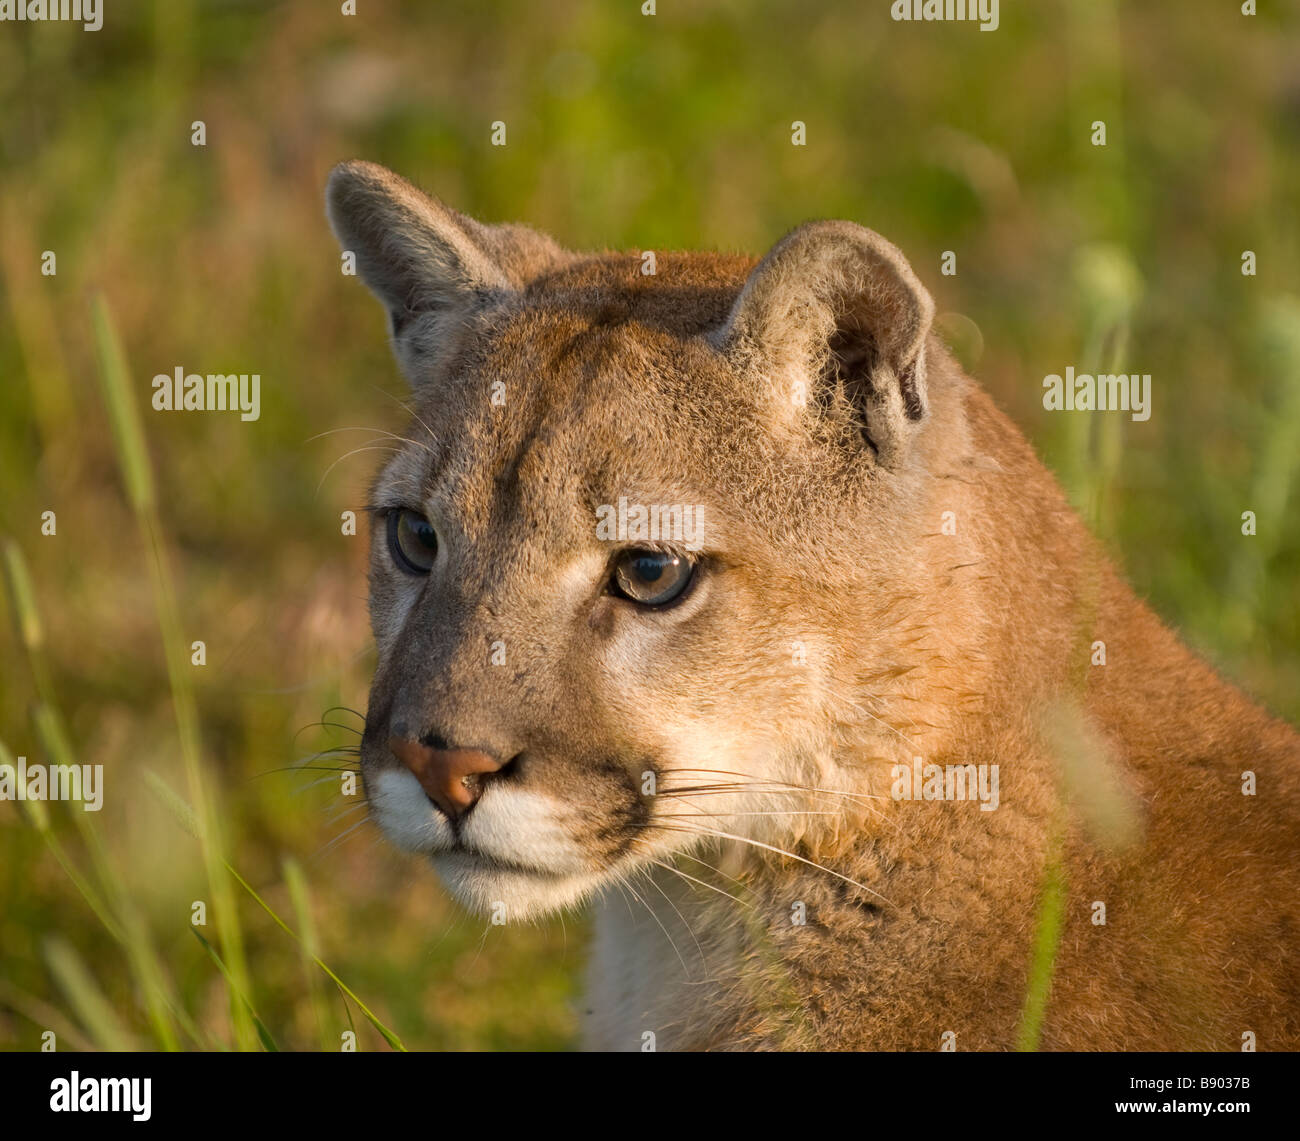 Portrait of a mountain lion in the grass Stock Photo